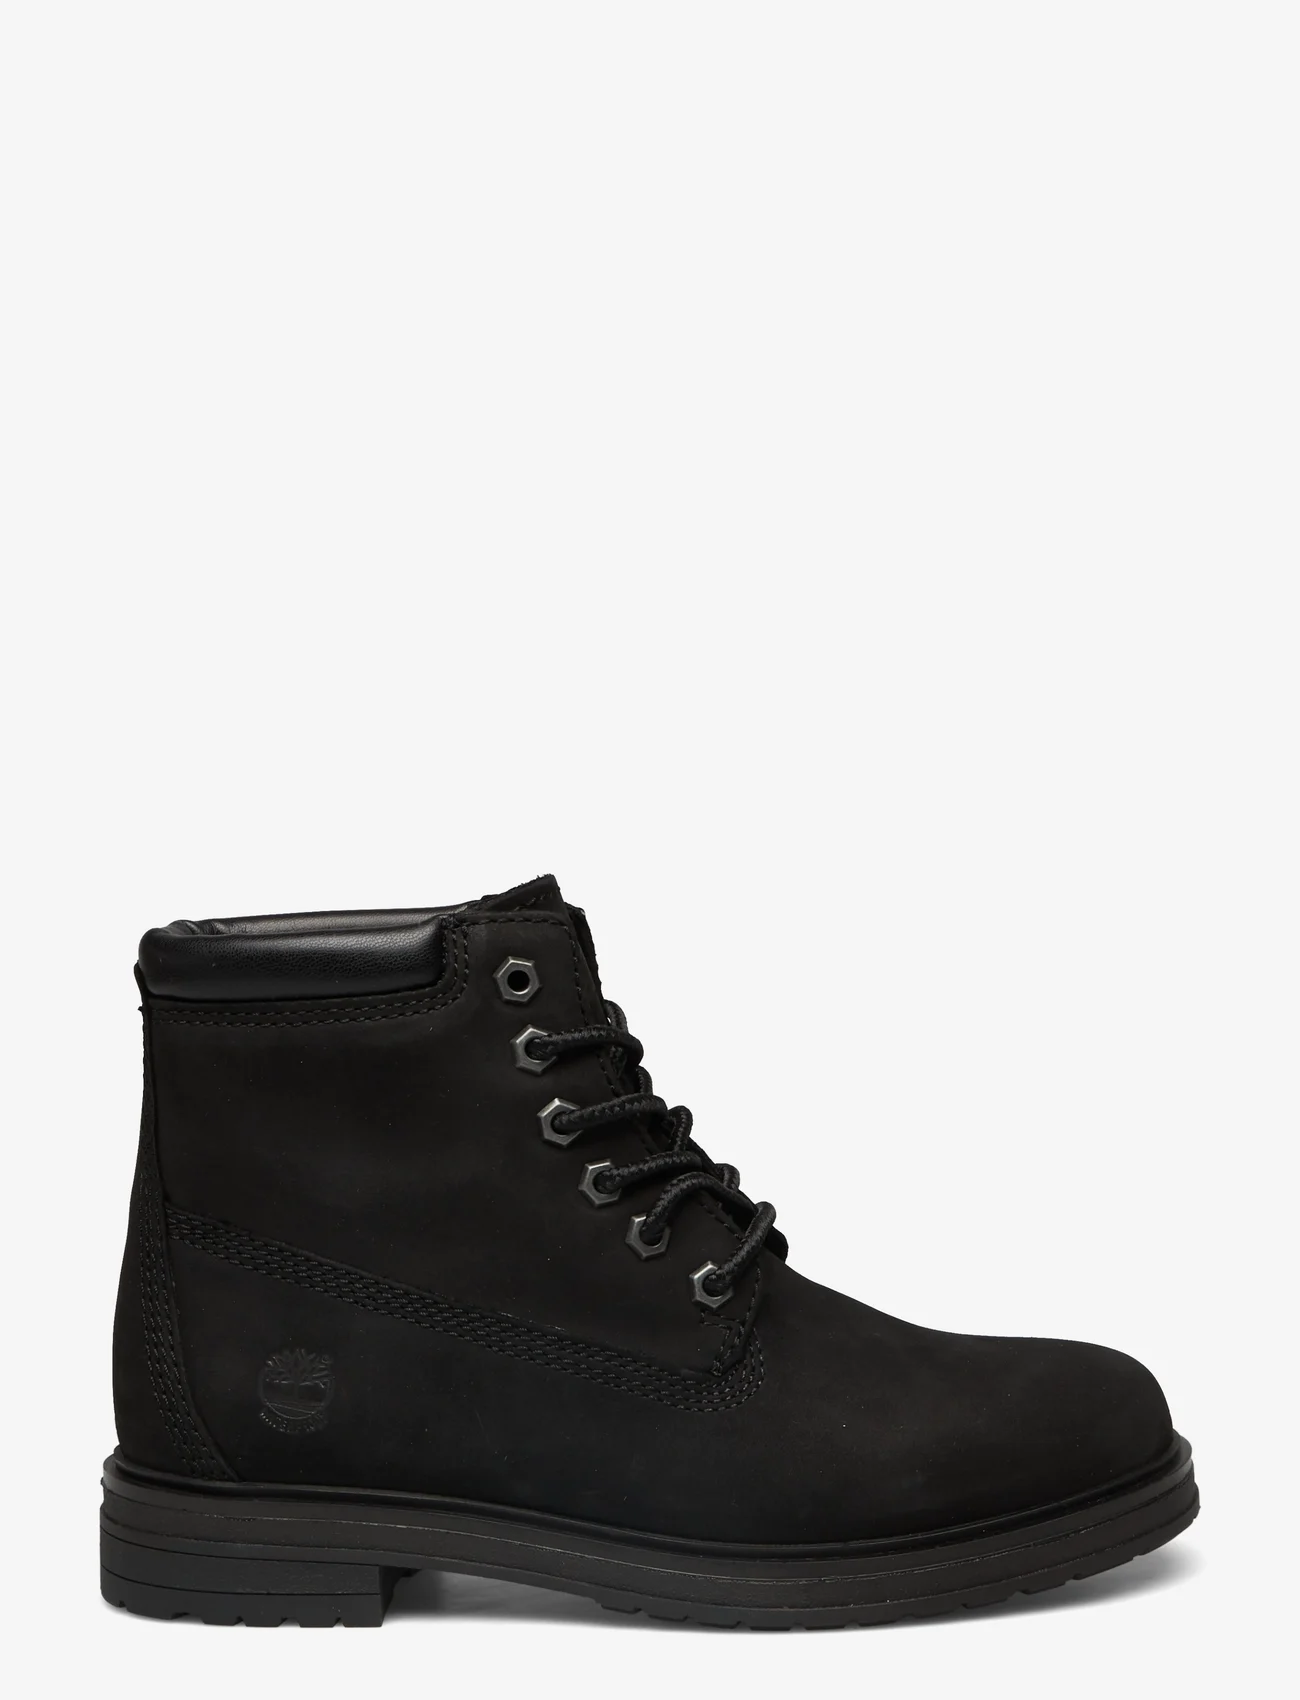 Timberland - Hannover Hill 6in Boot WP - suvarstomi aulinukai - black - 1